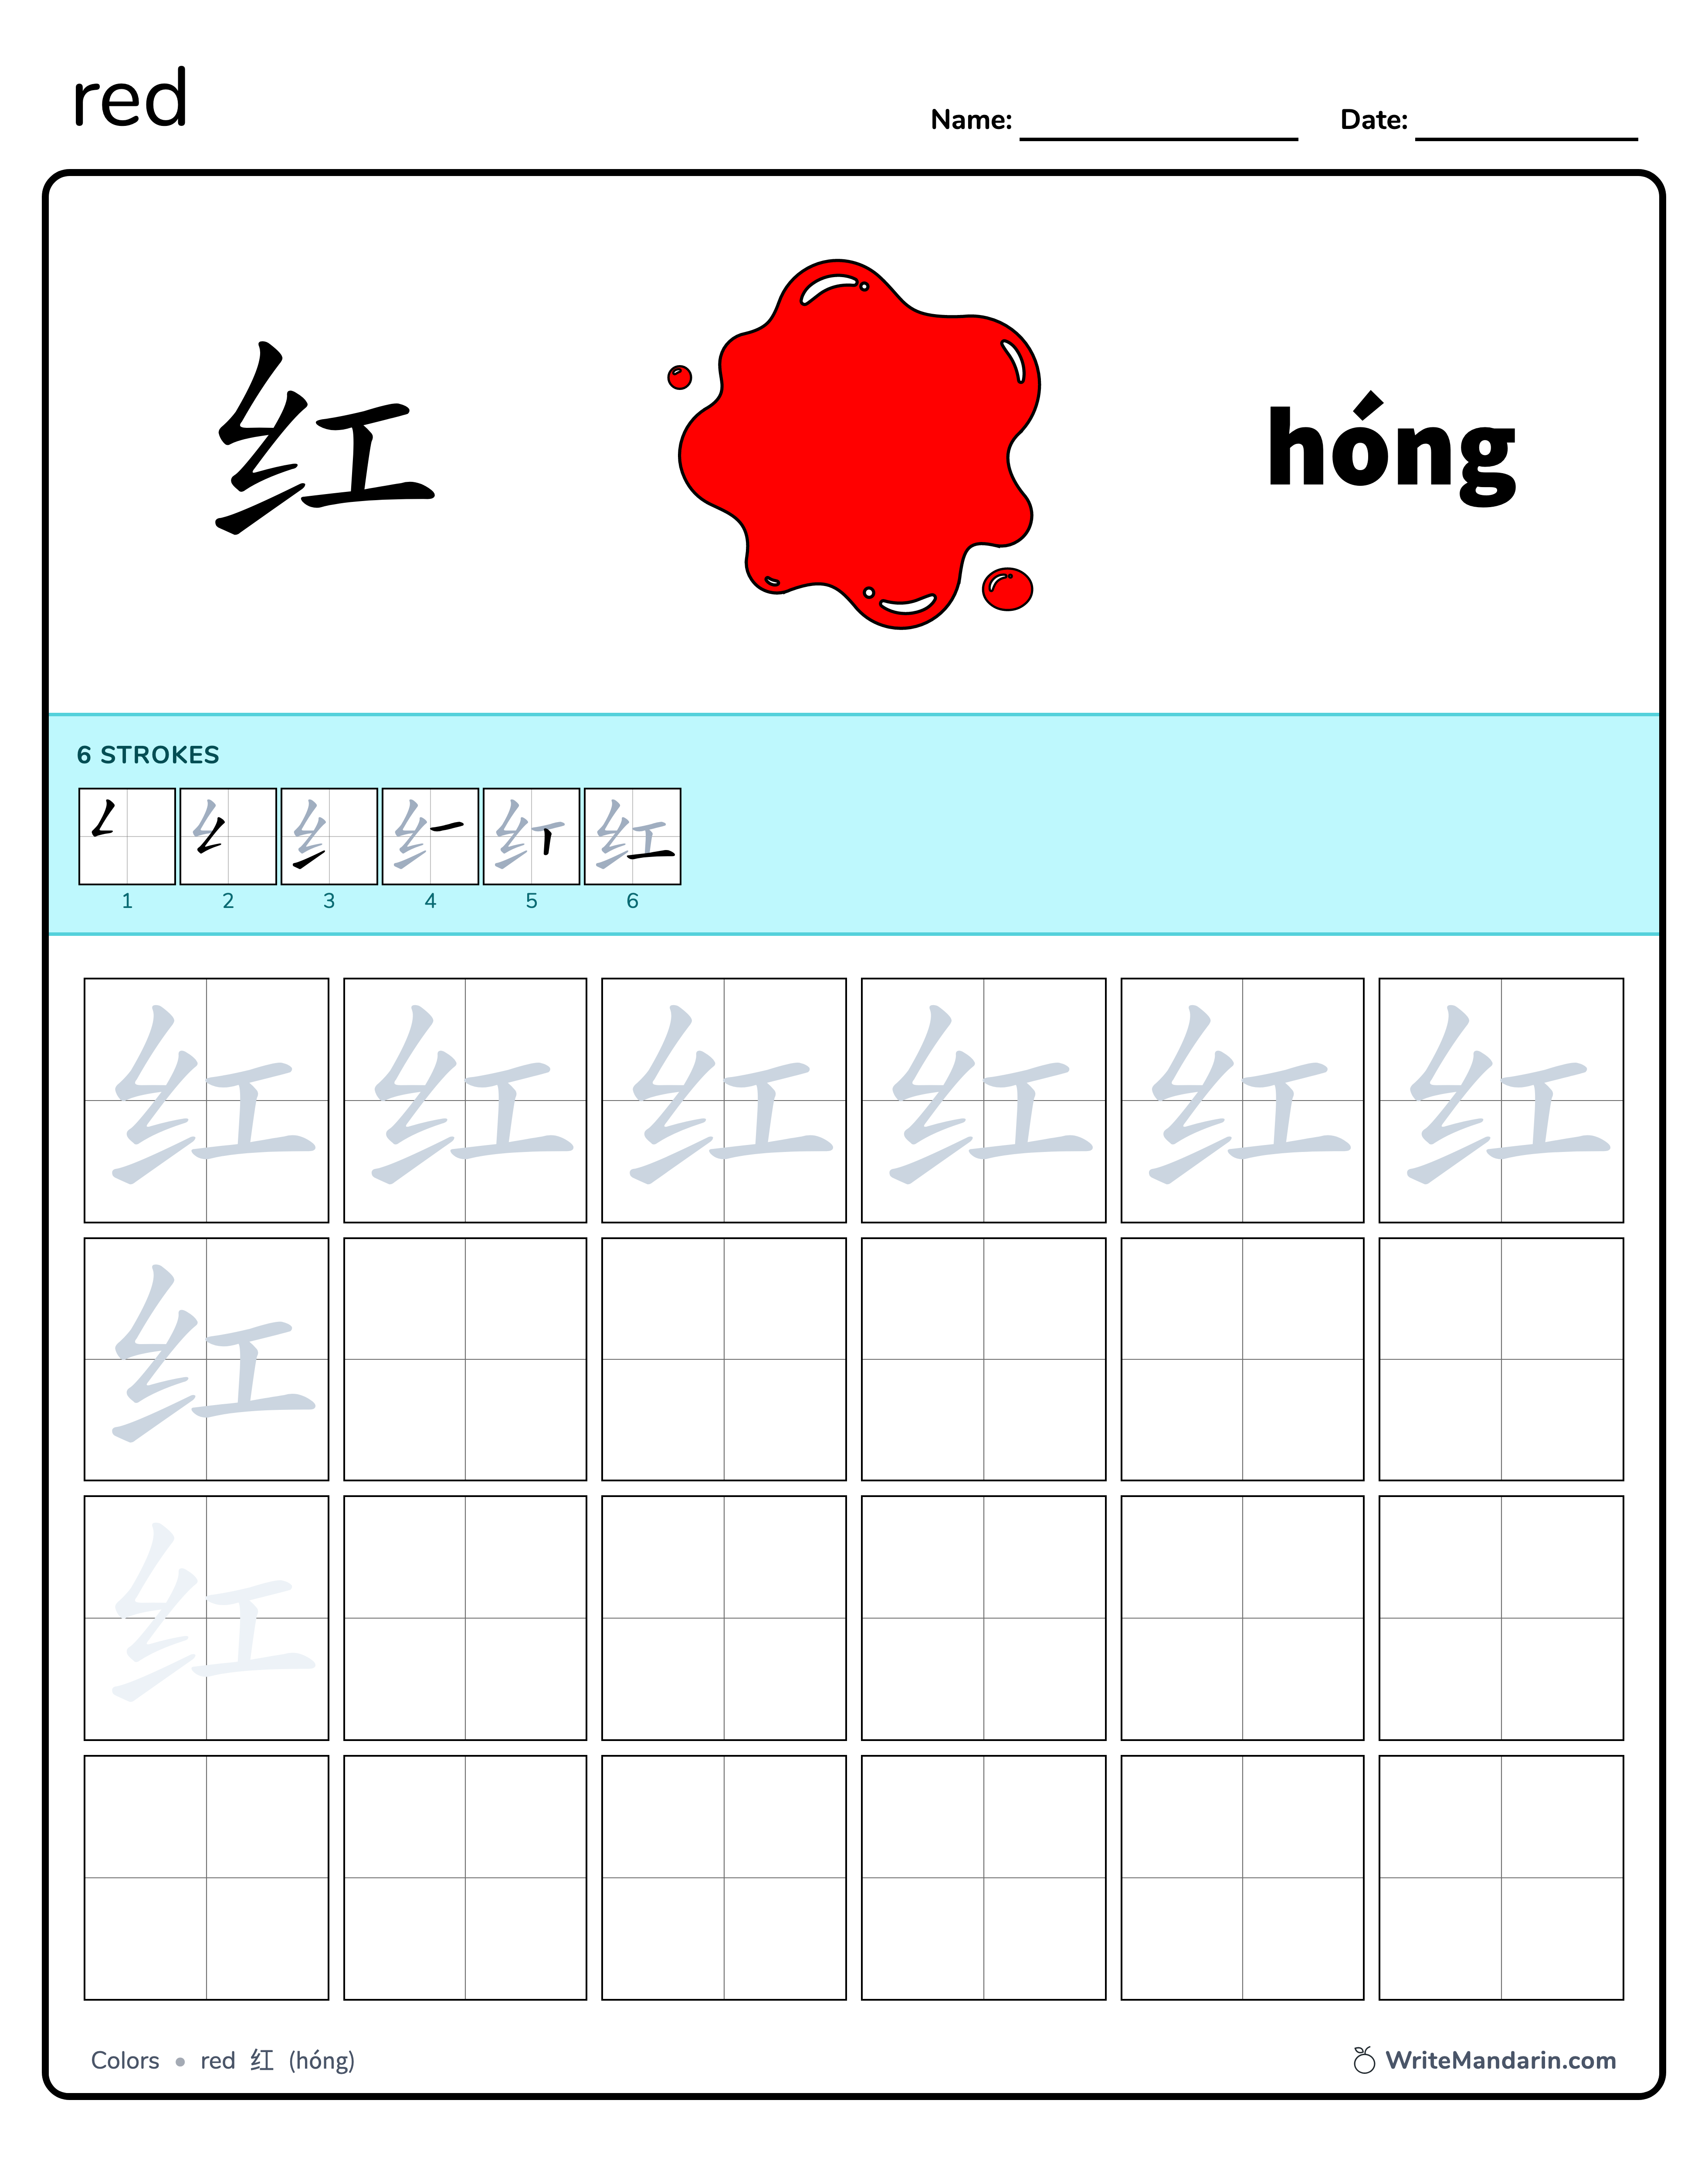 Preview image of Red 红 worksheet